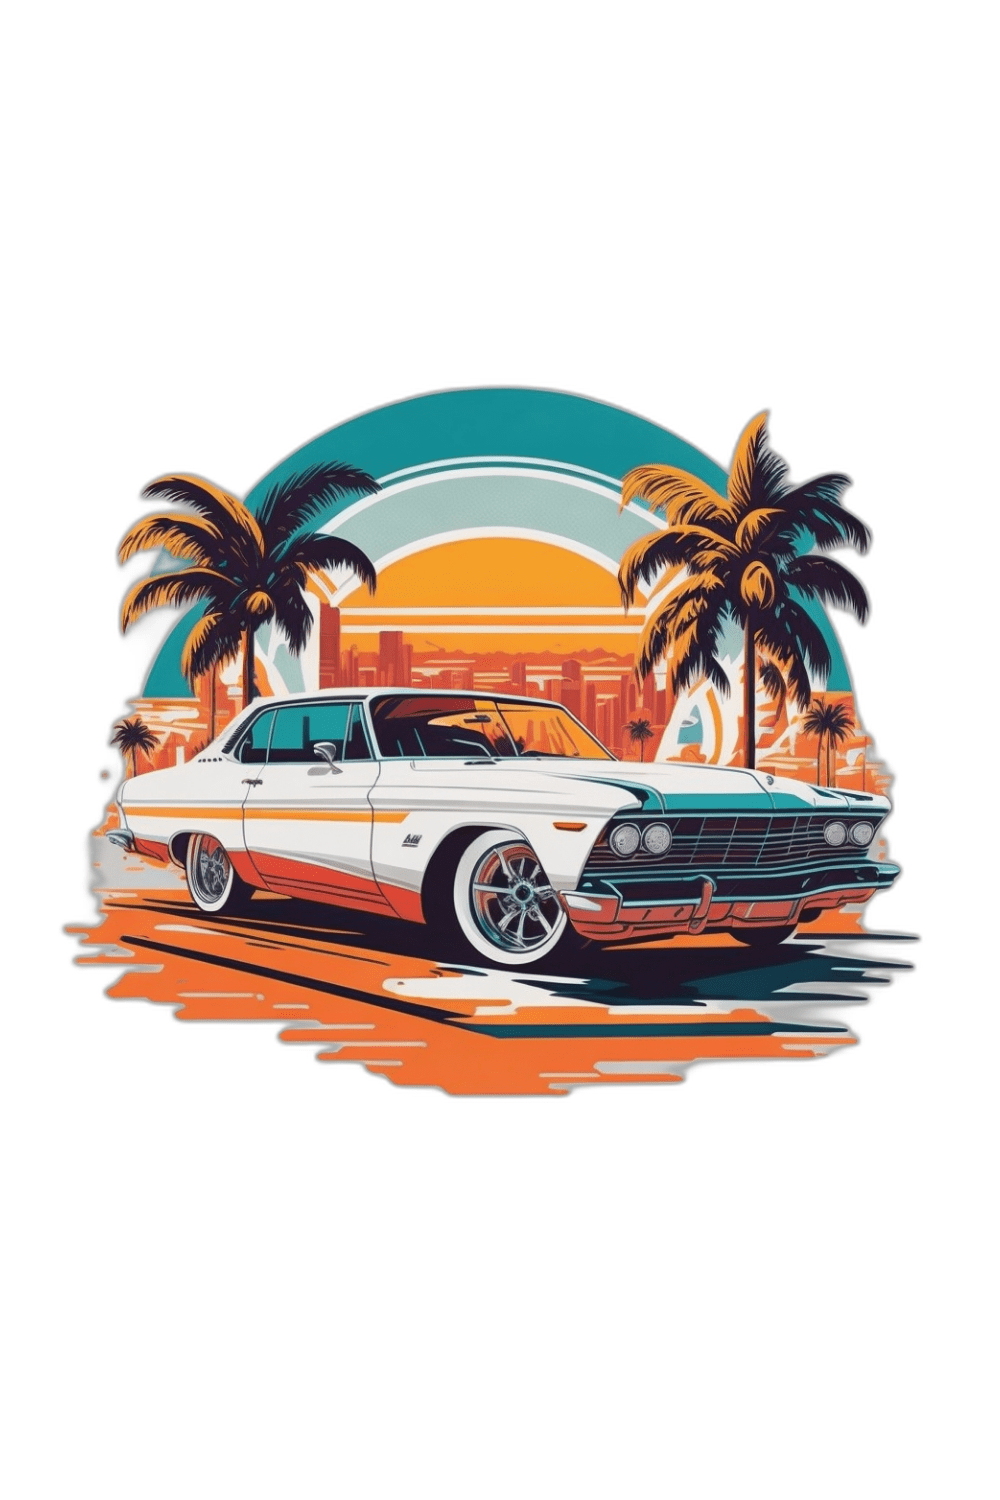 Classic car with Miami sunset view design for T-Shirt ,stock image , illustration etc pinterest preview image.